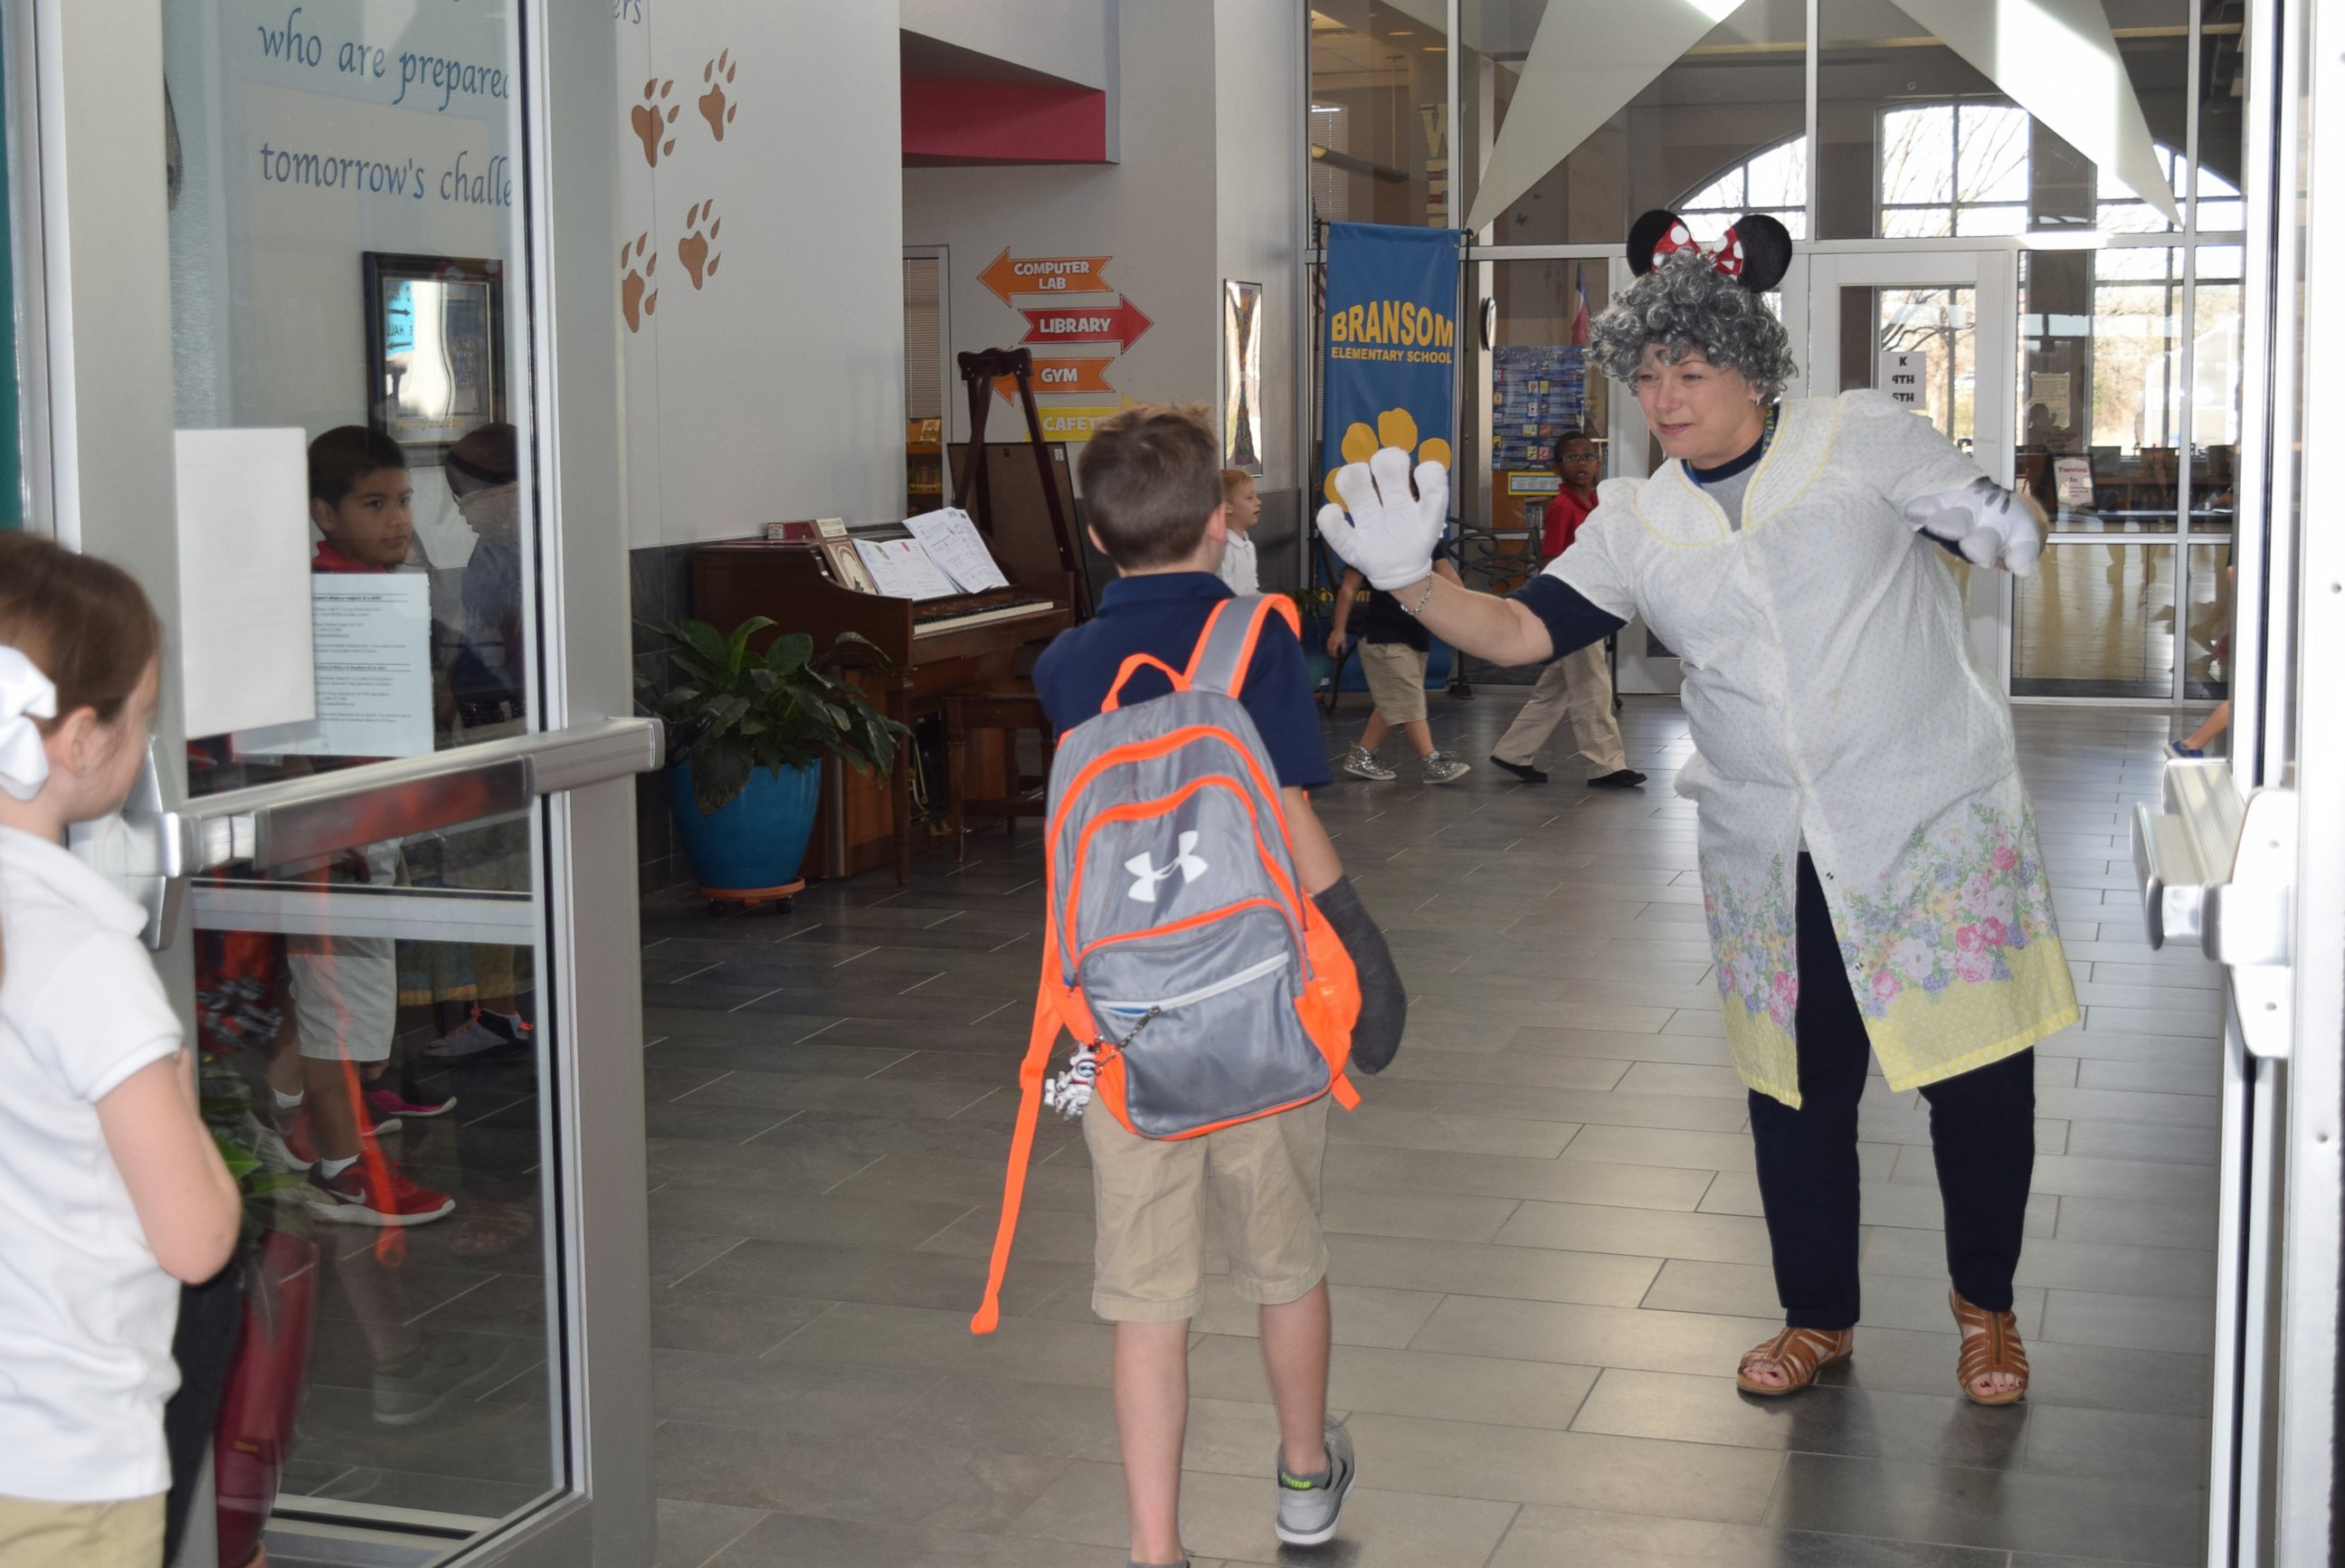 PHOTO: Cindy Matthews, a teacher's assistant at the Academy of the Arts at Bransom Elementary in Burleson, Texas, greets students in silly costumes every morning. Here she is shown greeting students as a granny.